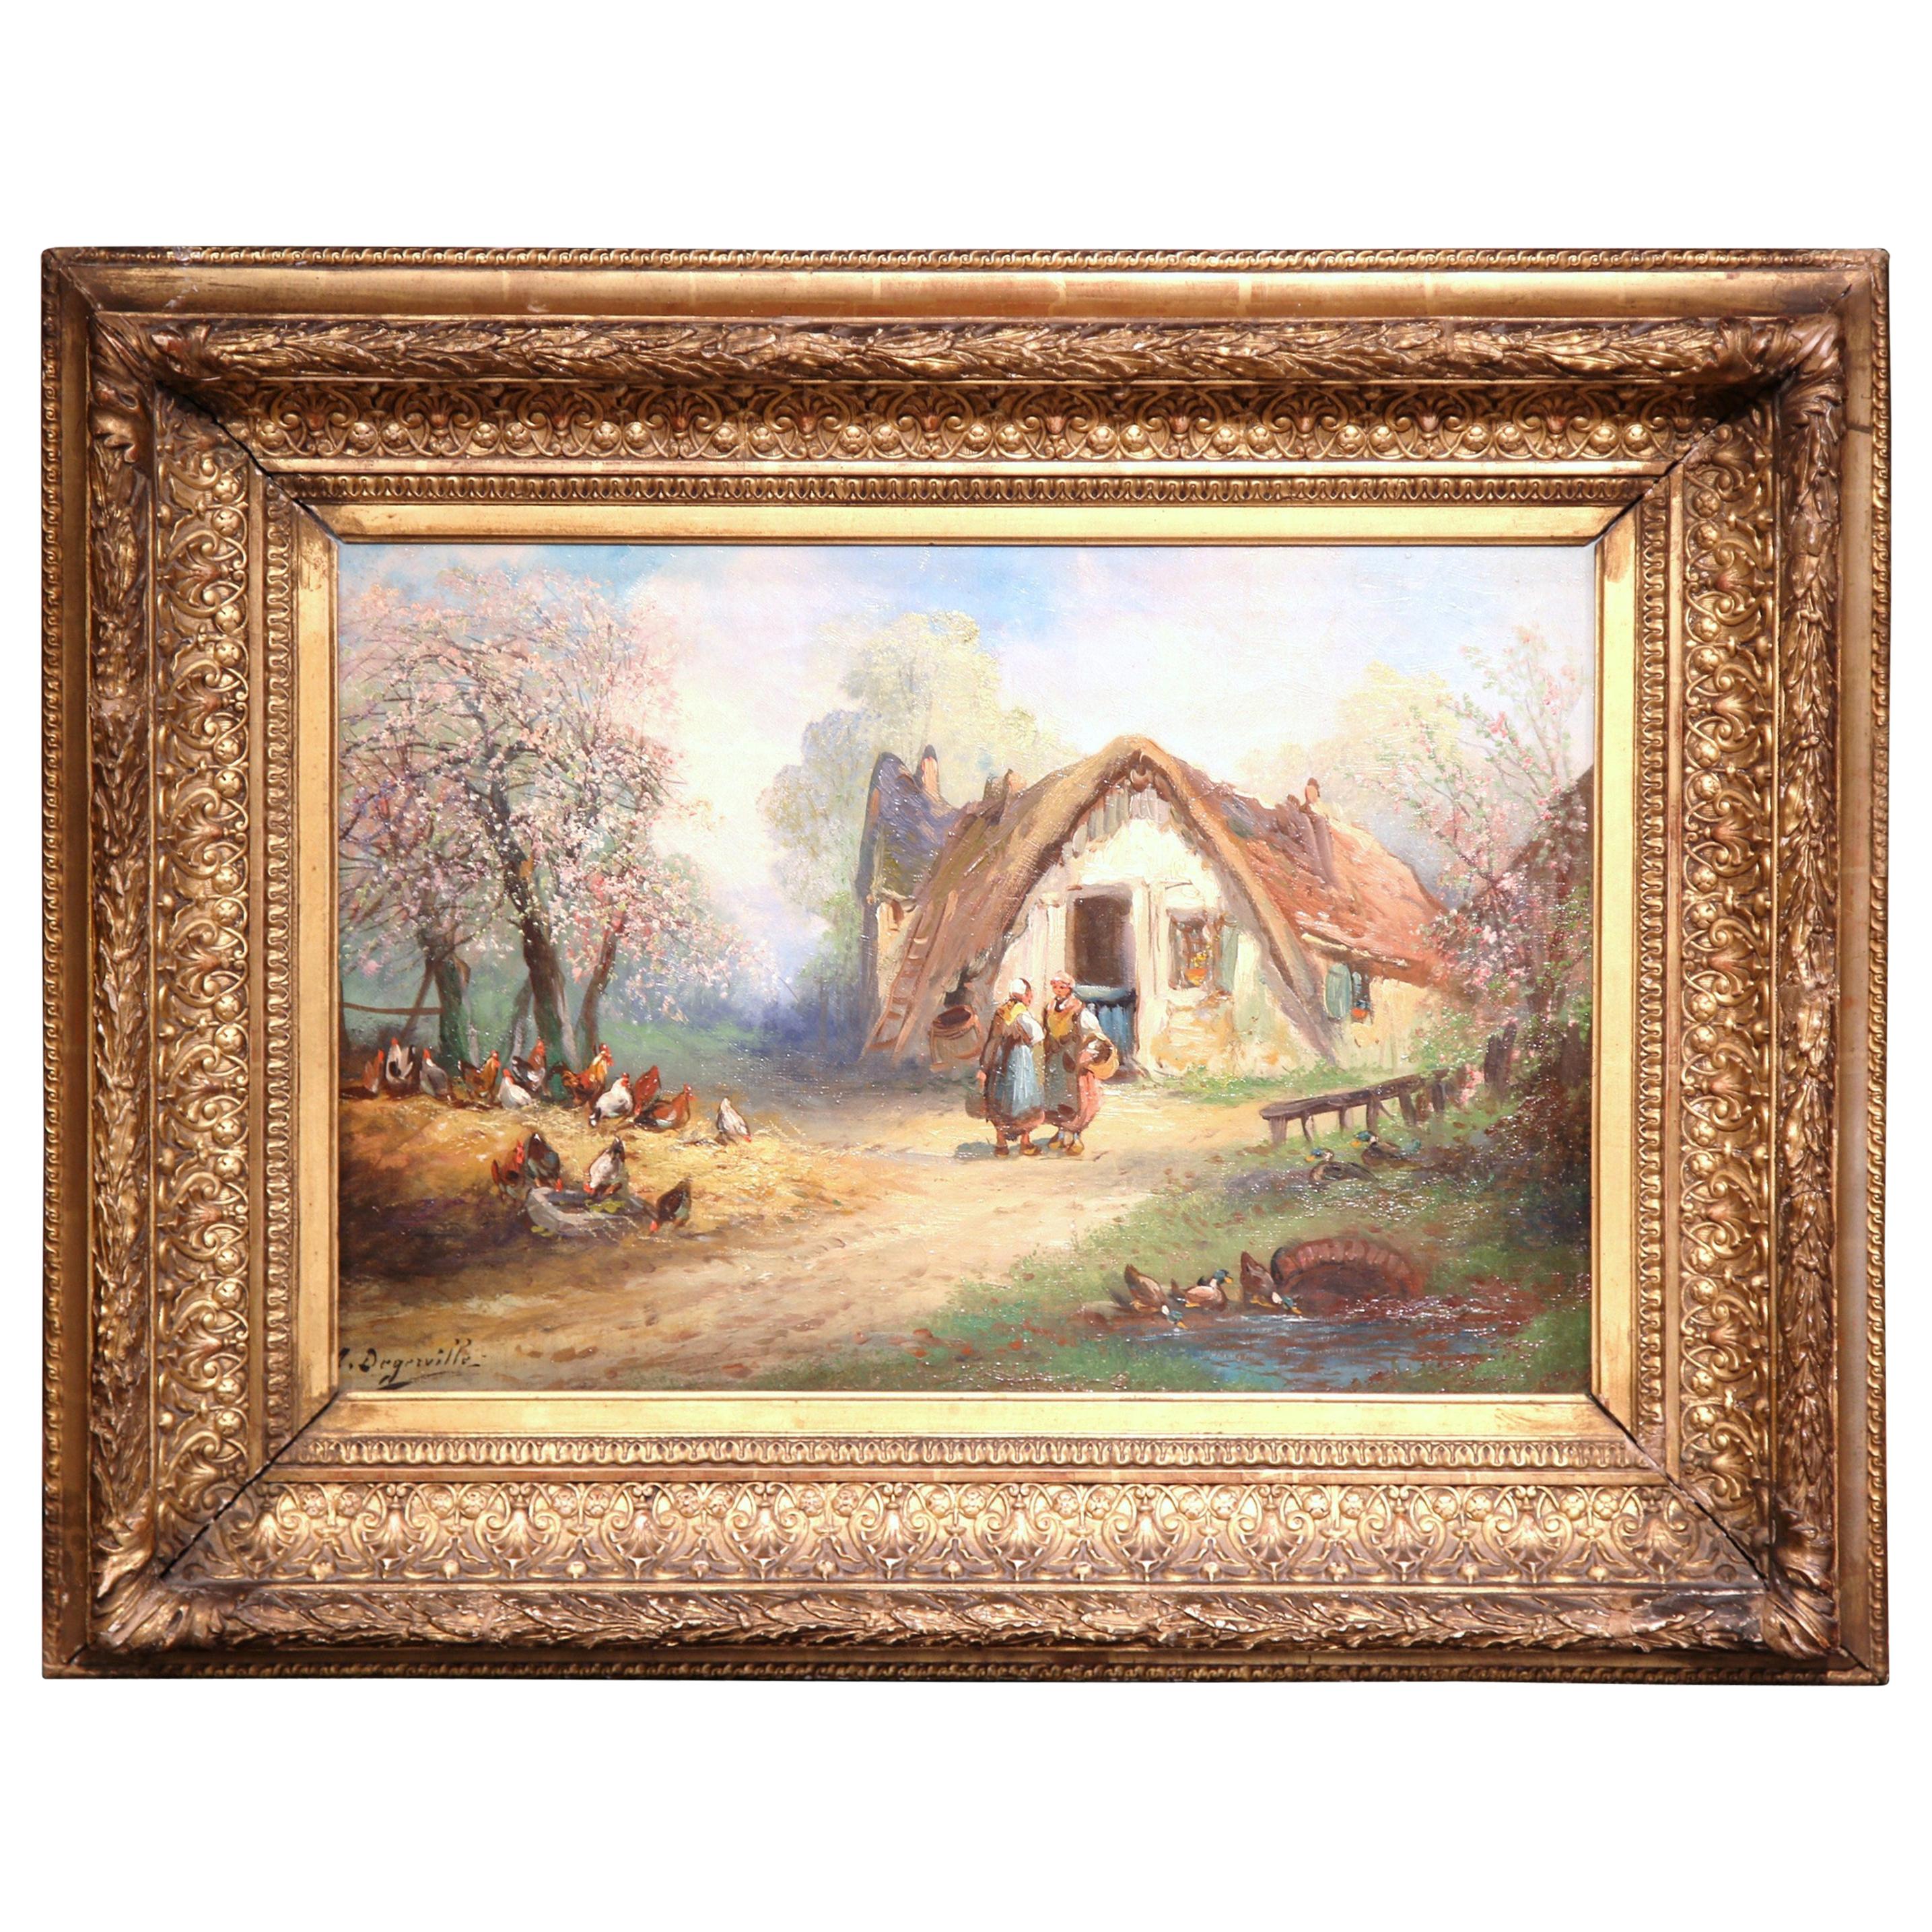 19th Century French Country Scene Oil Painting in Gilt Frame Signed A Degerville